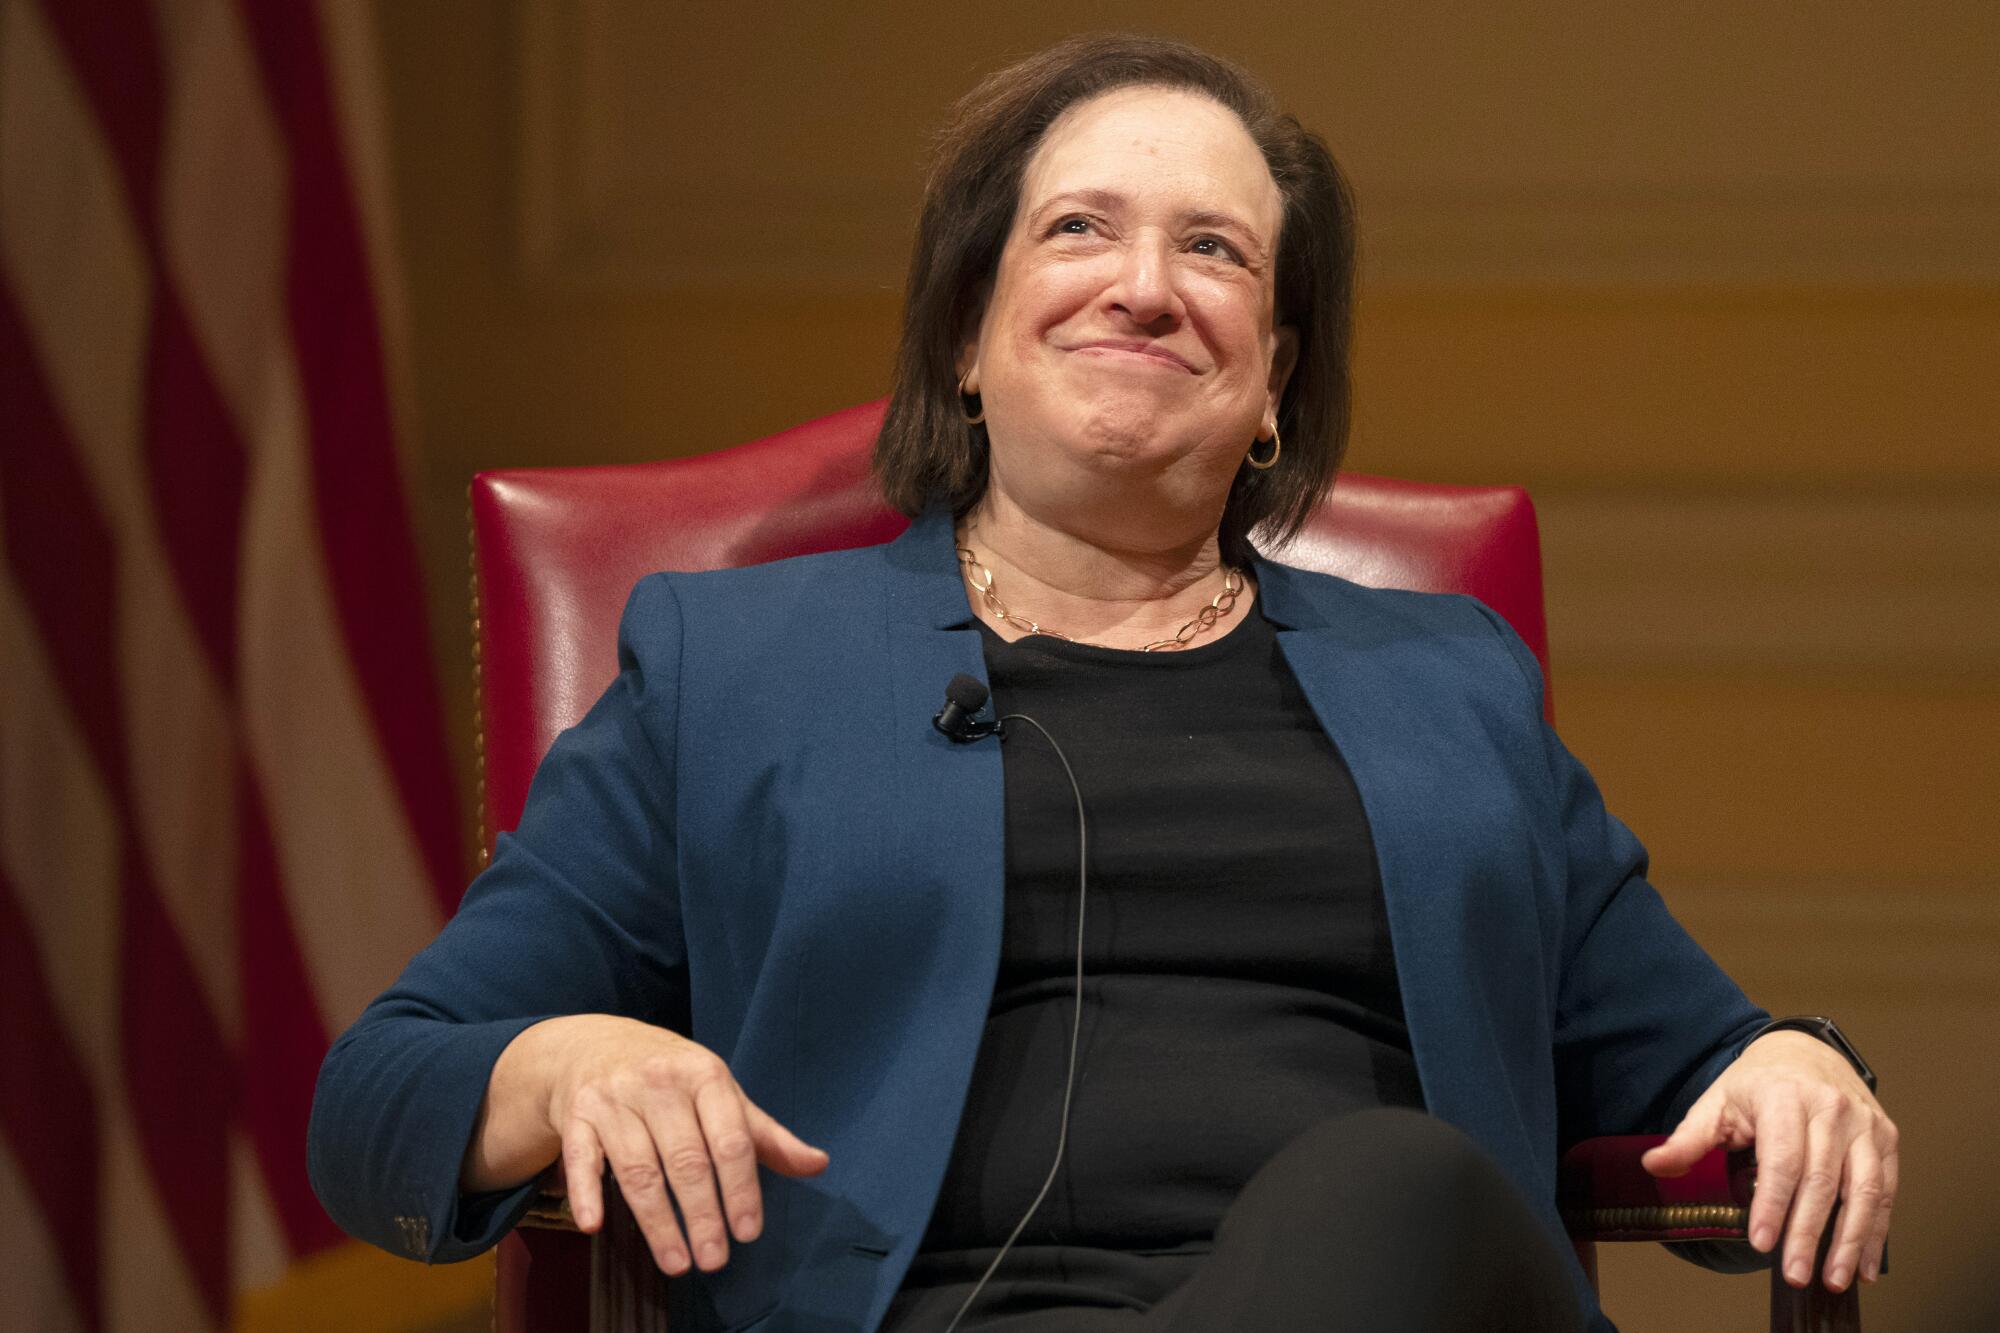 U.S. Supreme Court Justice Elena Kagan, seated and wearing a blue jacket.